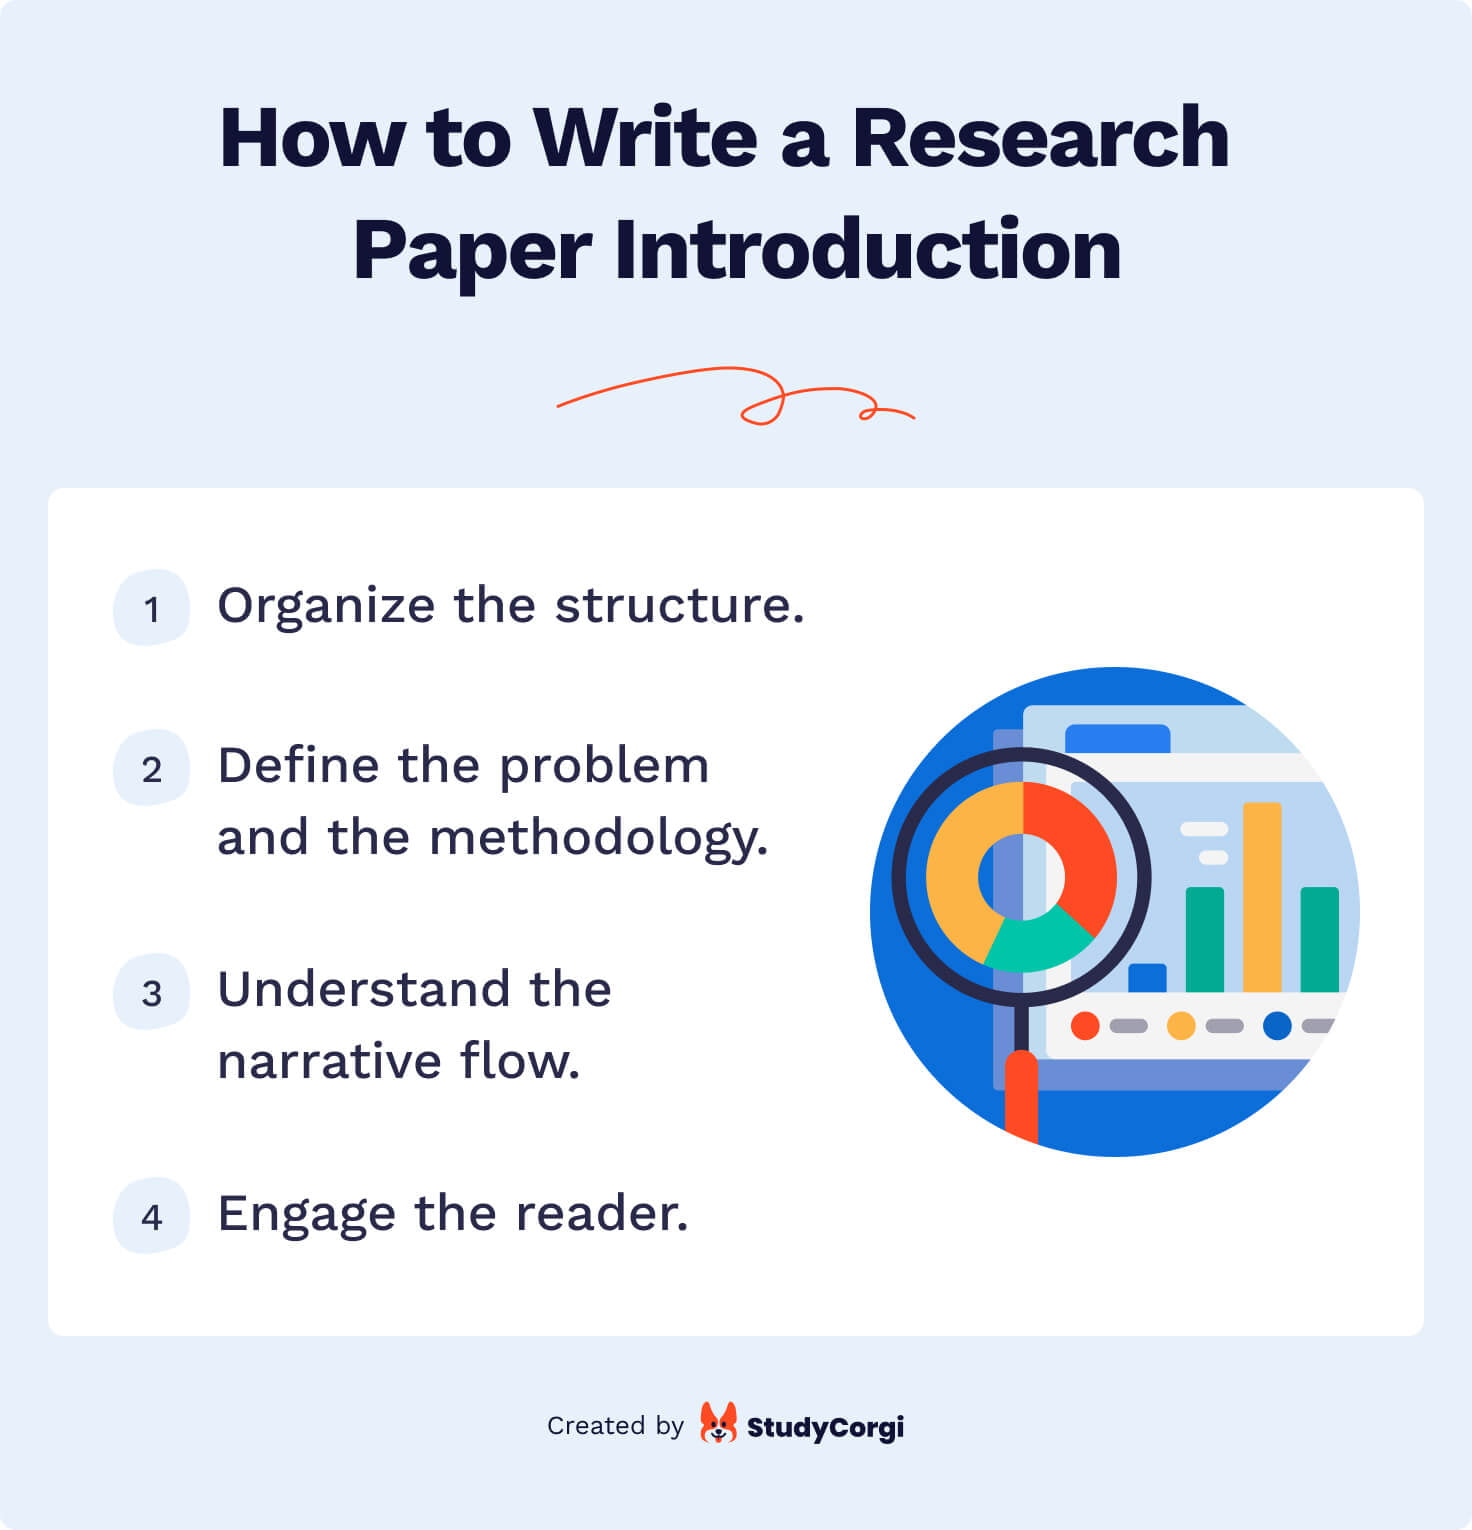 research introduction maker free